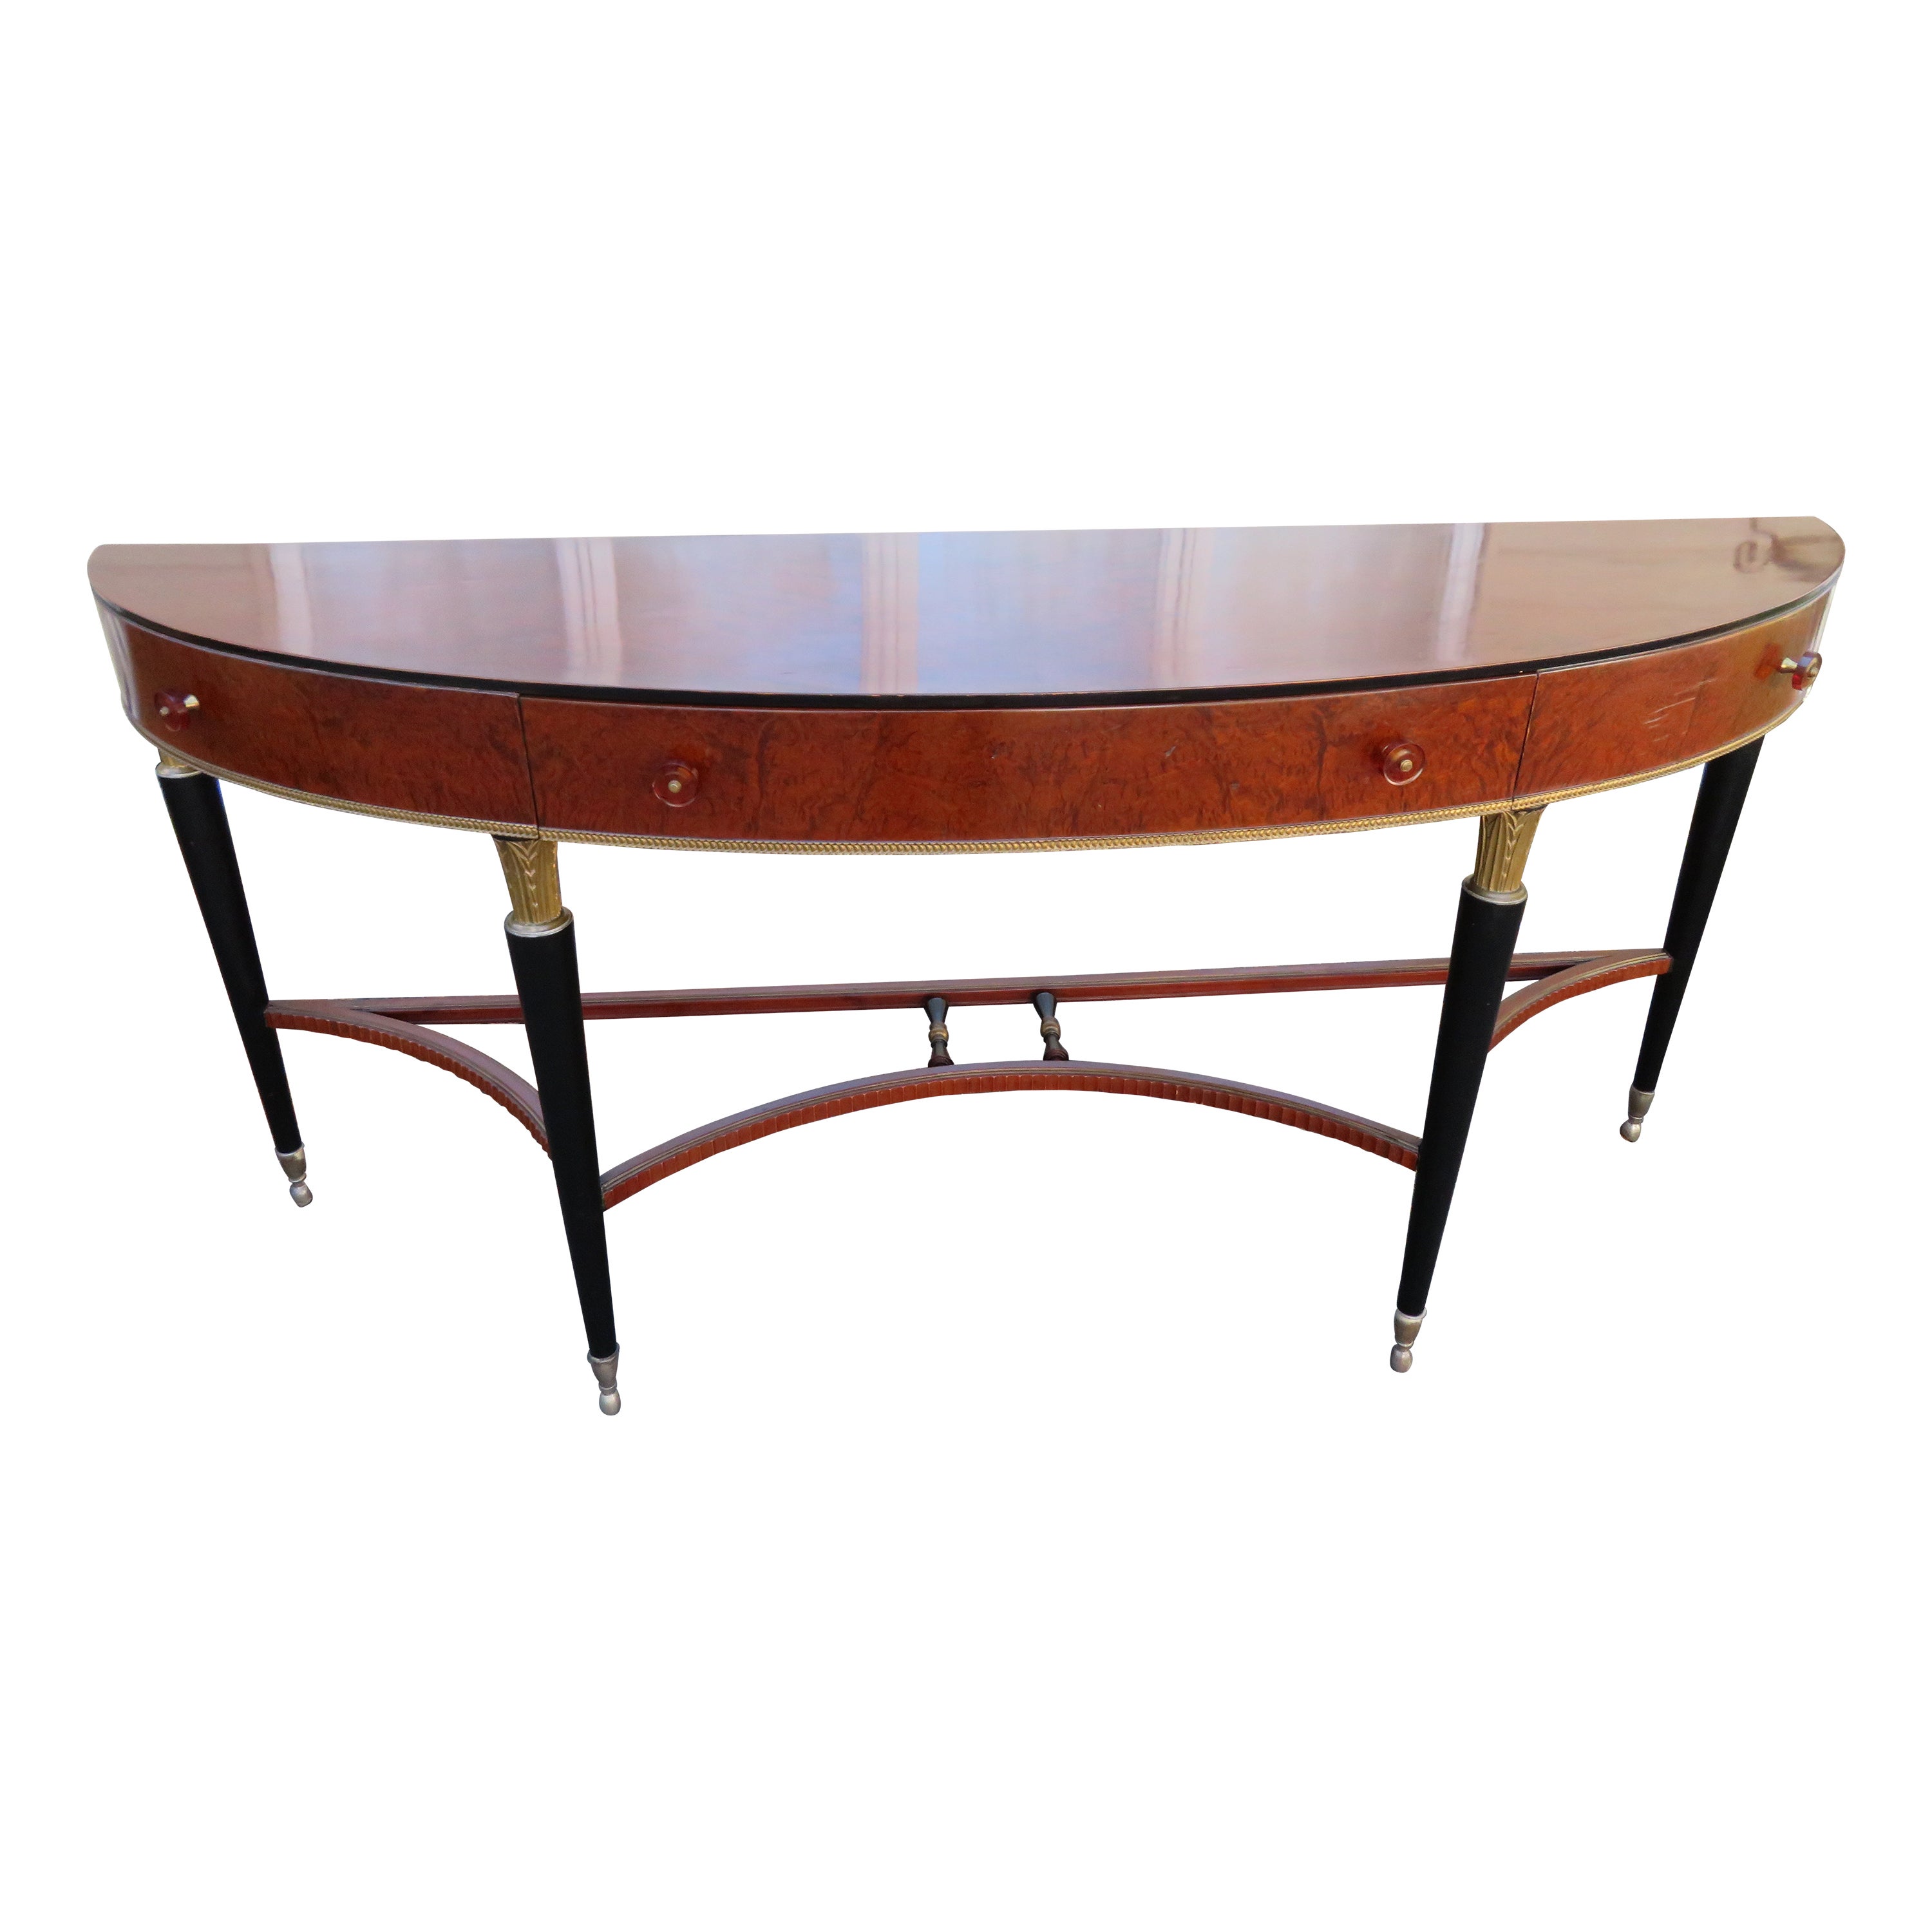 Stunning Louis XVI Style French Mahogany Demilune Console Table For Sale